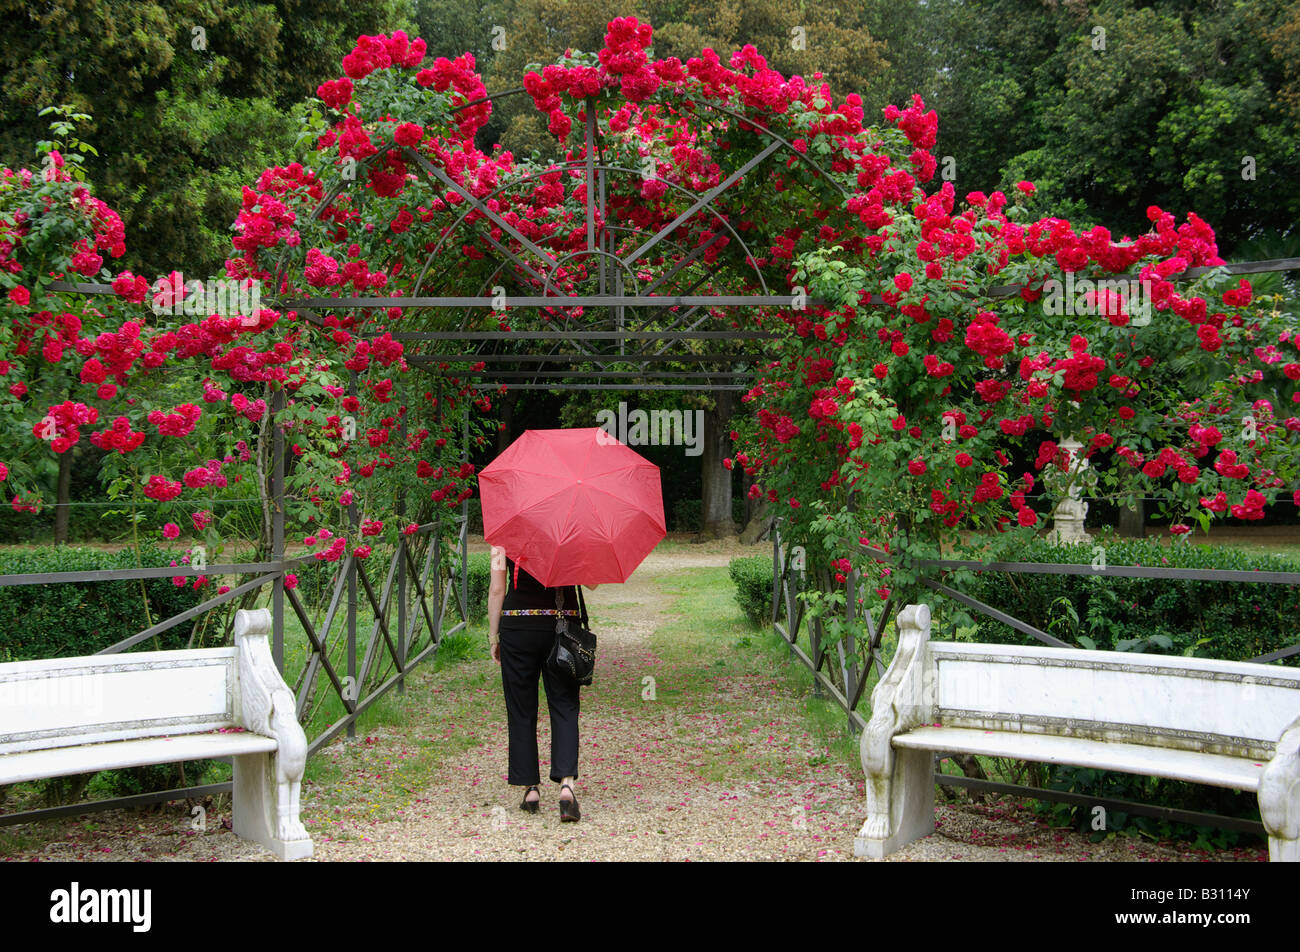 woman seen from behind walking with a red umbrella through a pergola with red roses Stock Photo